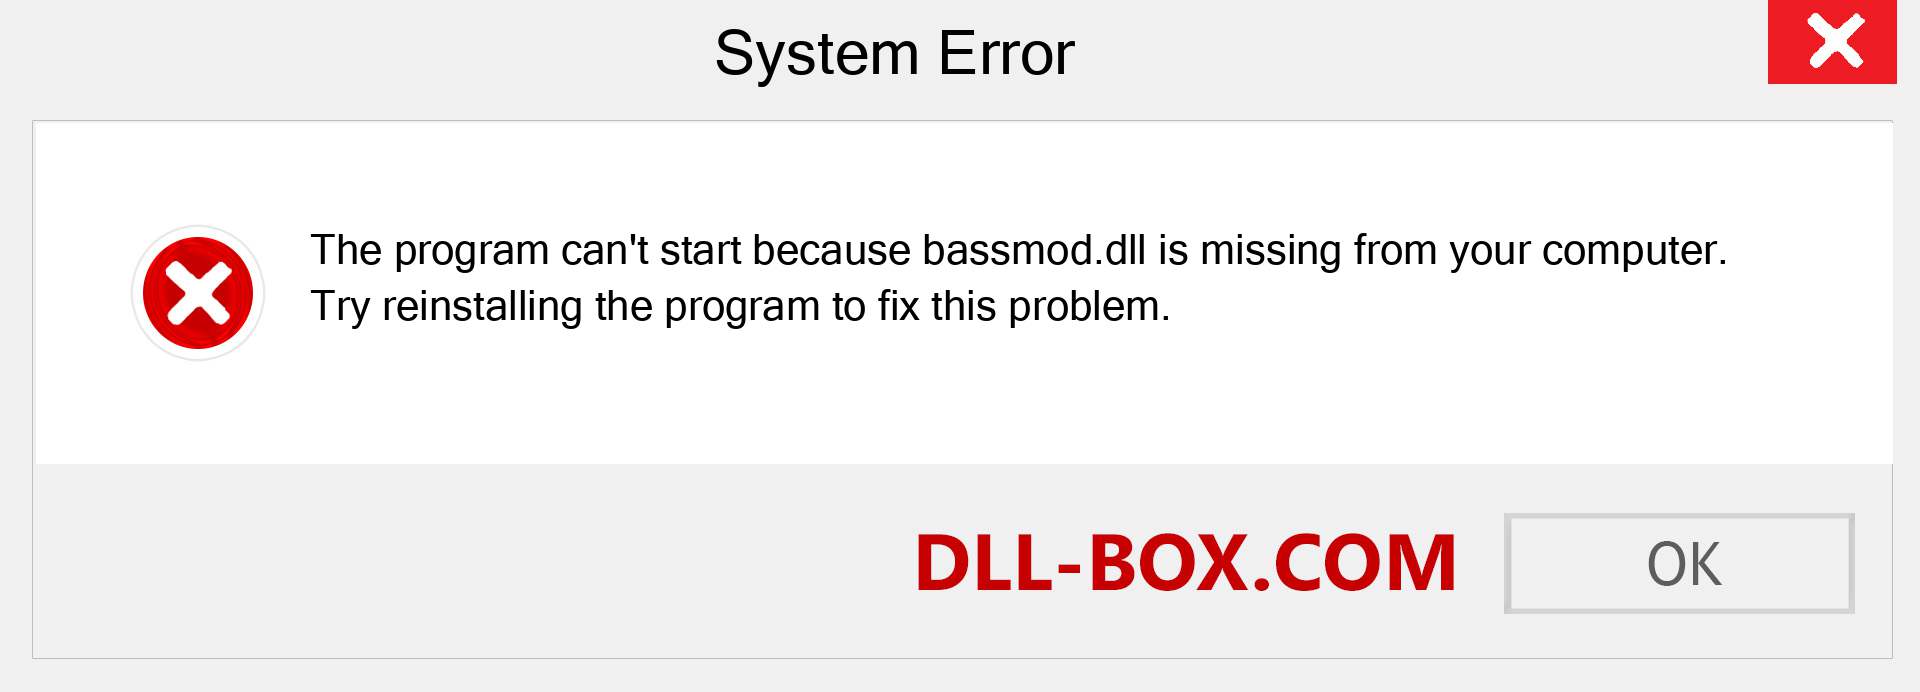  bassmod.dll file is missing?. Download for Windows 7, 8, 10 - Fix  bassmod dll Missing Error on Windows, photos, images